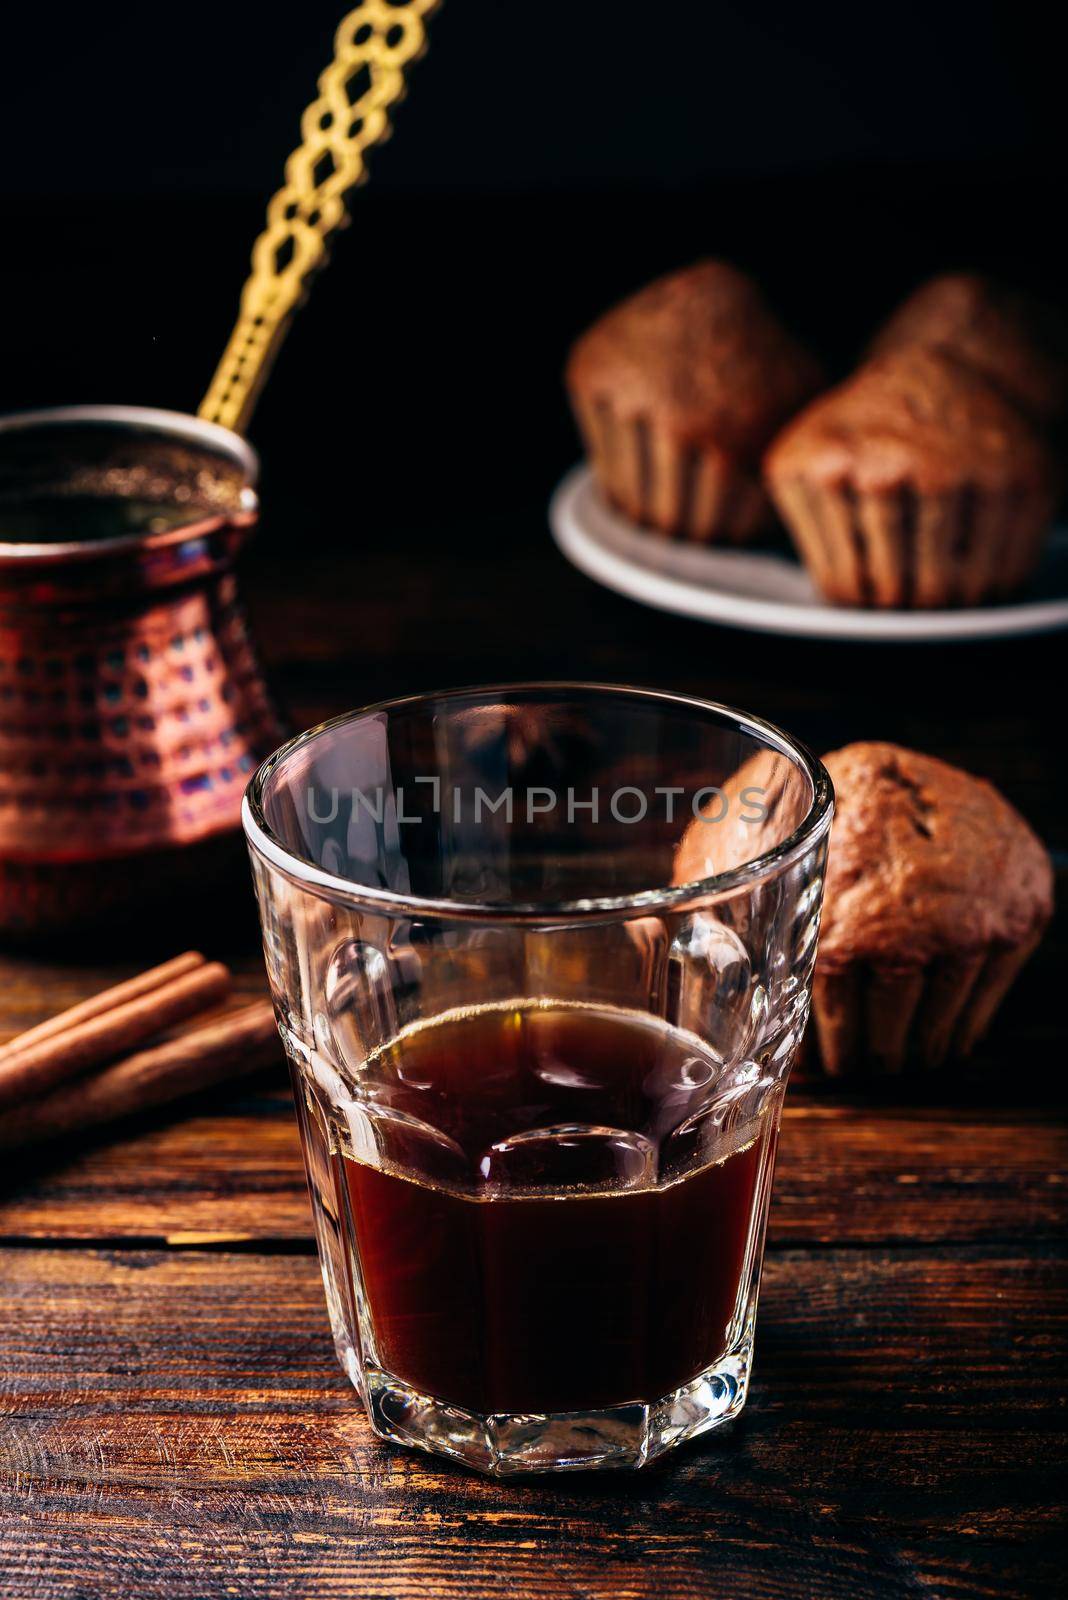 Turkish coffee with spices and muffins by Seva_blsv